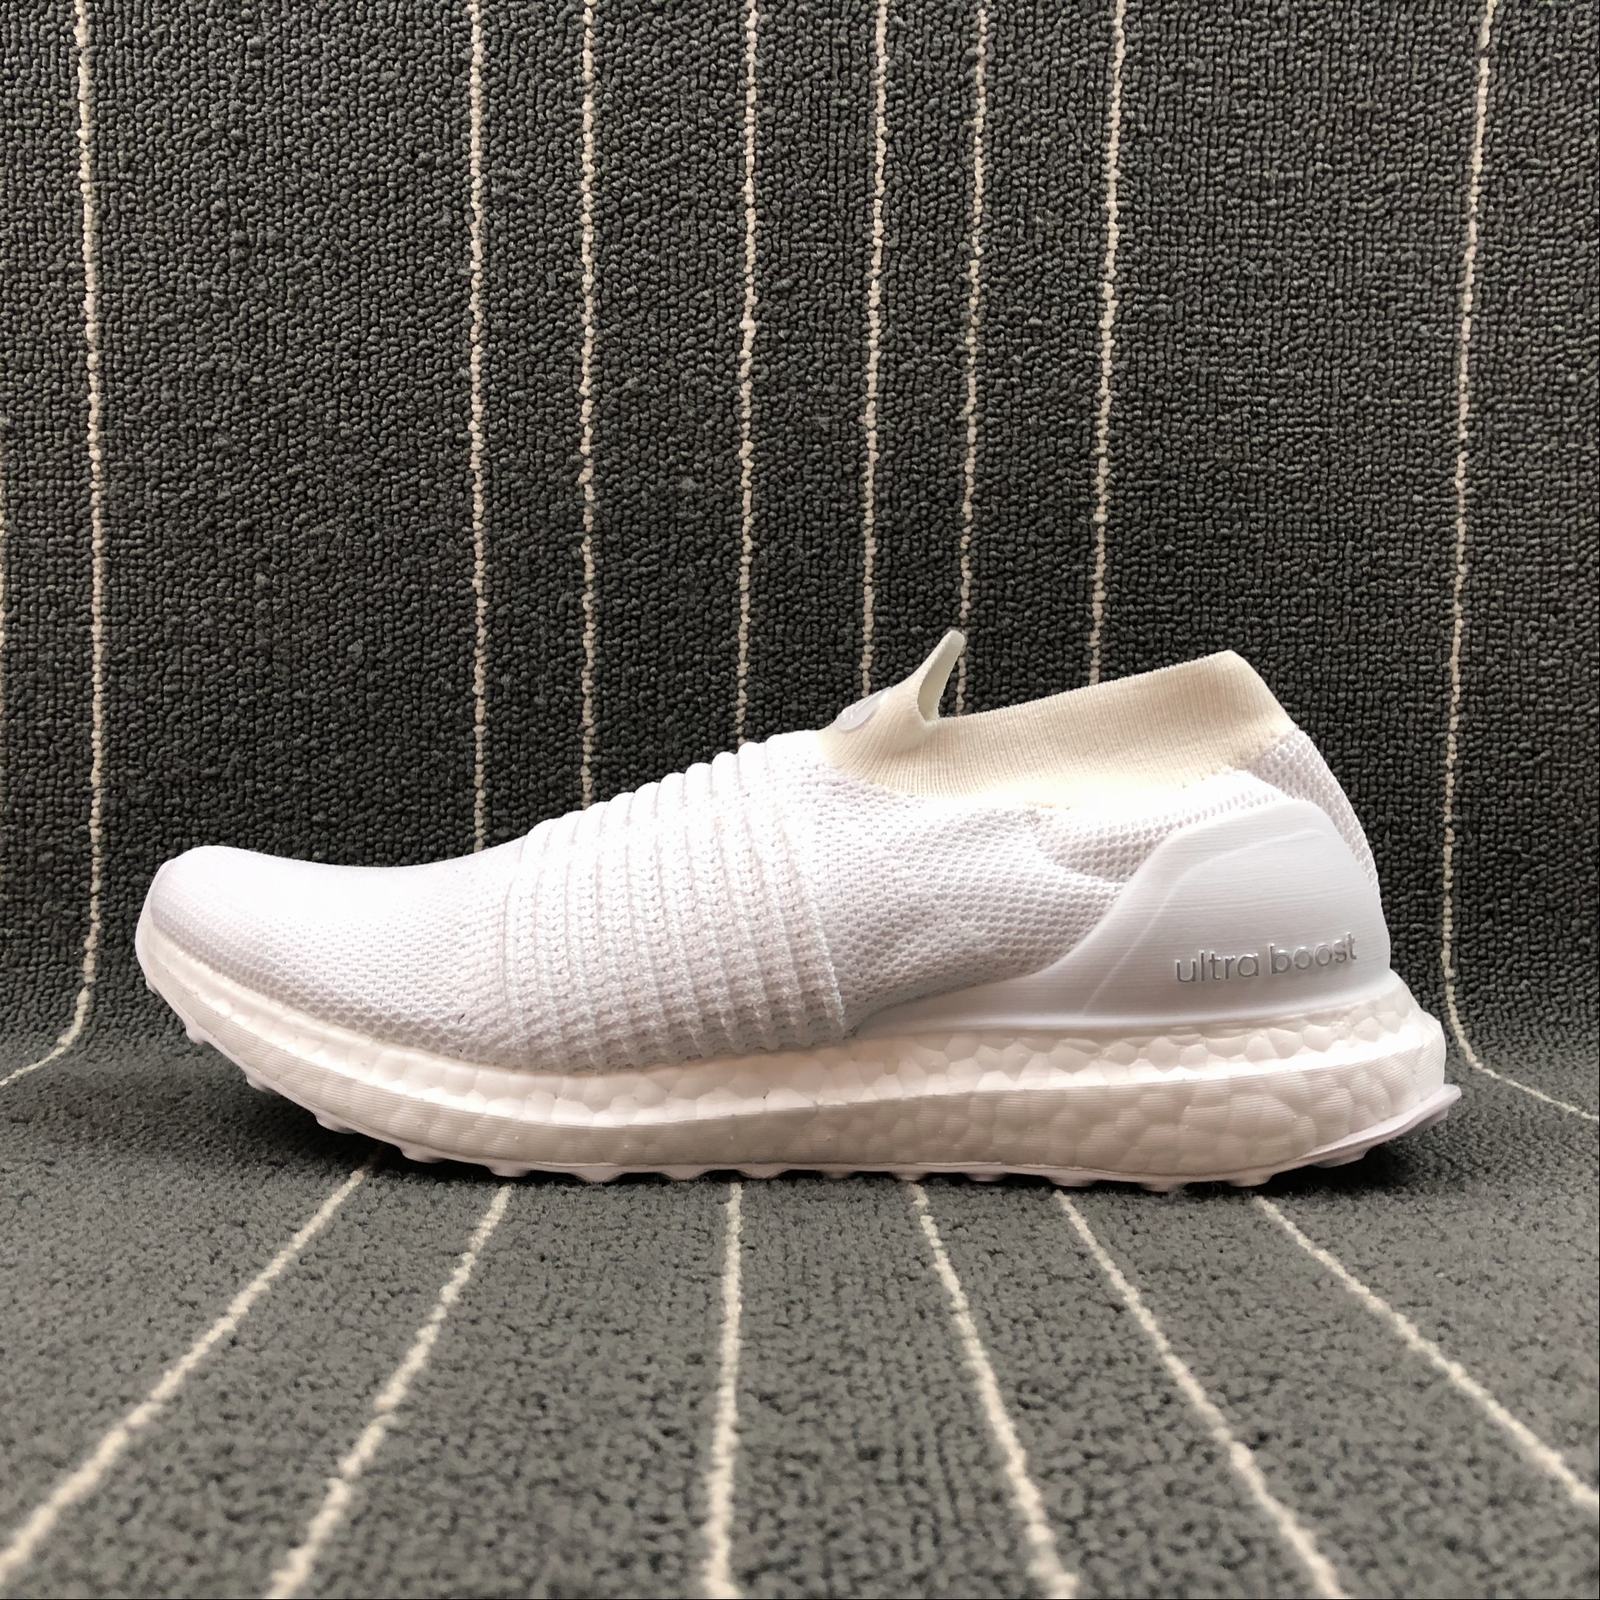 all white laceless ultra boost